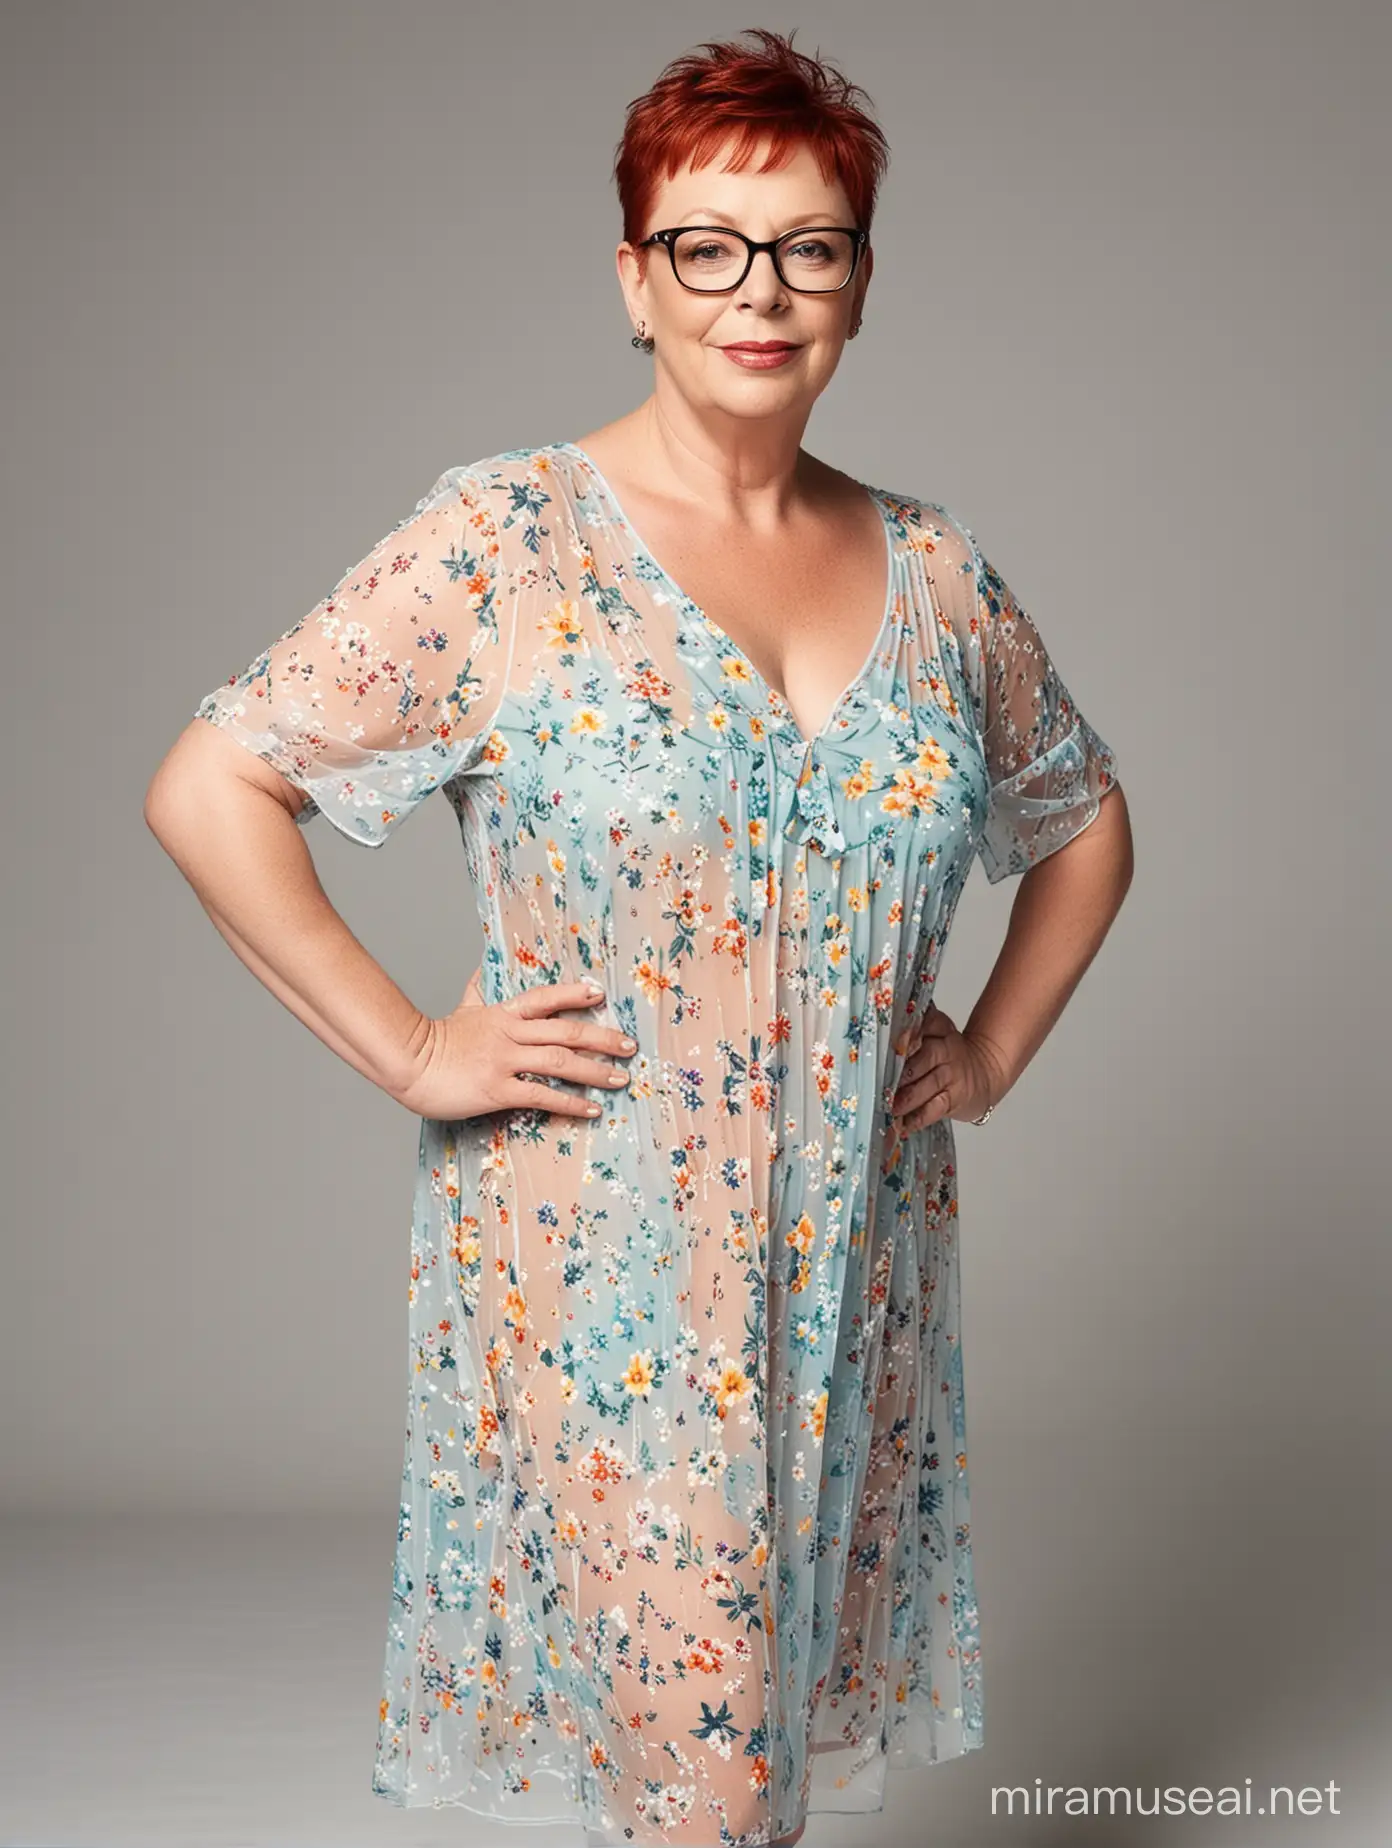 Comedian Jo Brand Laughing in a Sheer Summer Dress